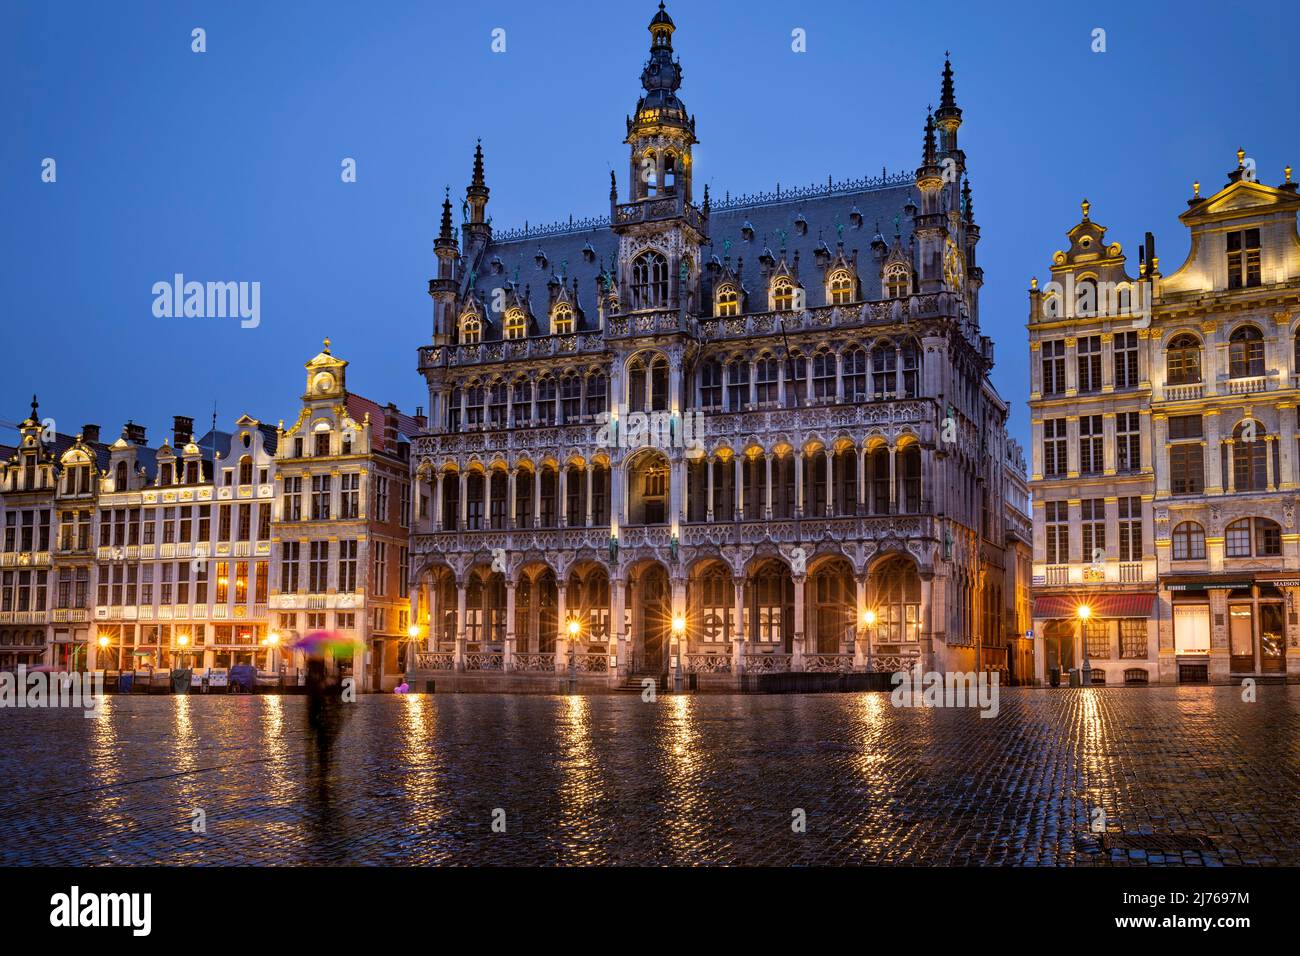 Belgium, Brussels, Grand Place, Market Square, UNESCO World Heritage Site, Broodhuis, Musée de la ville de Bruxelles, City Museum at blue hour with out of focus person in foreground Stock Photo